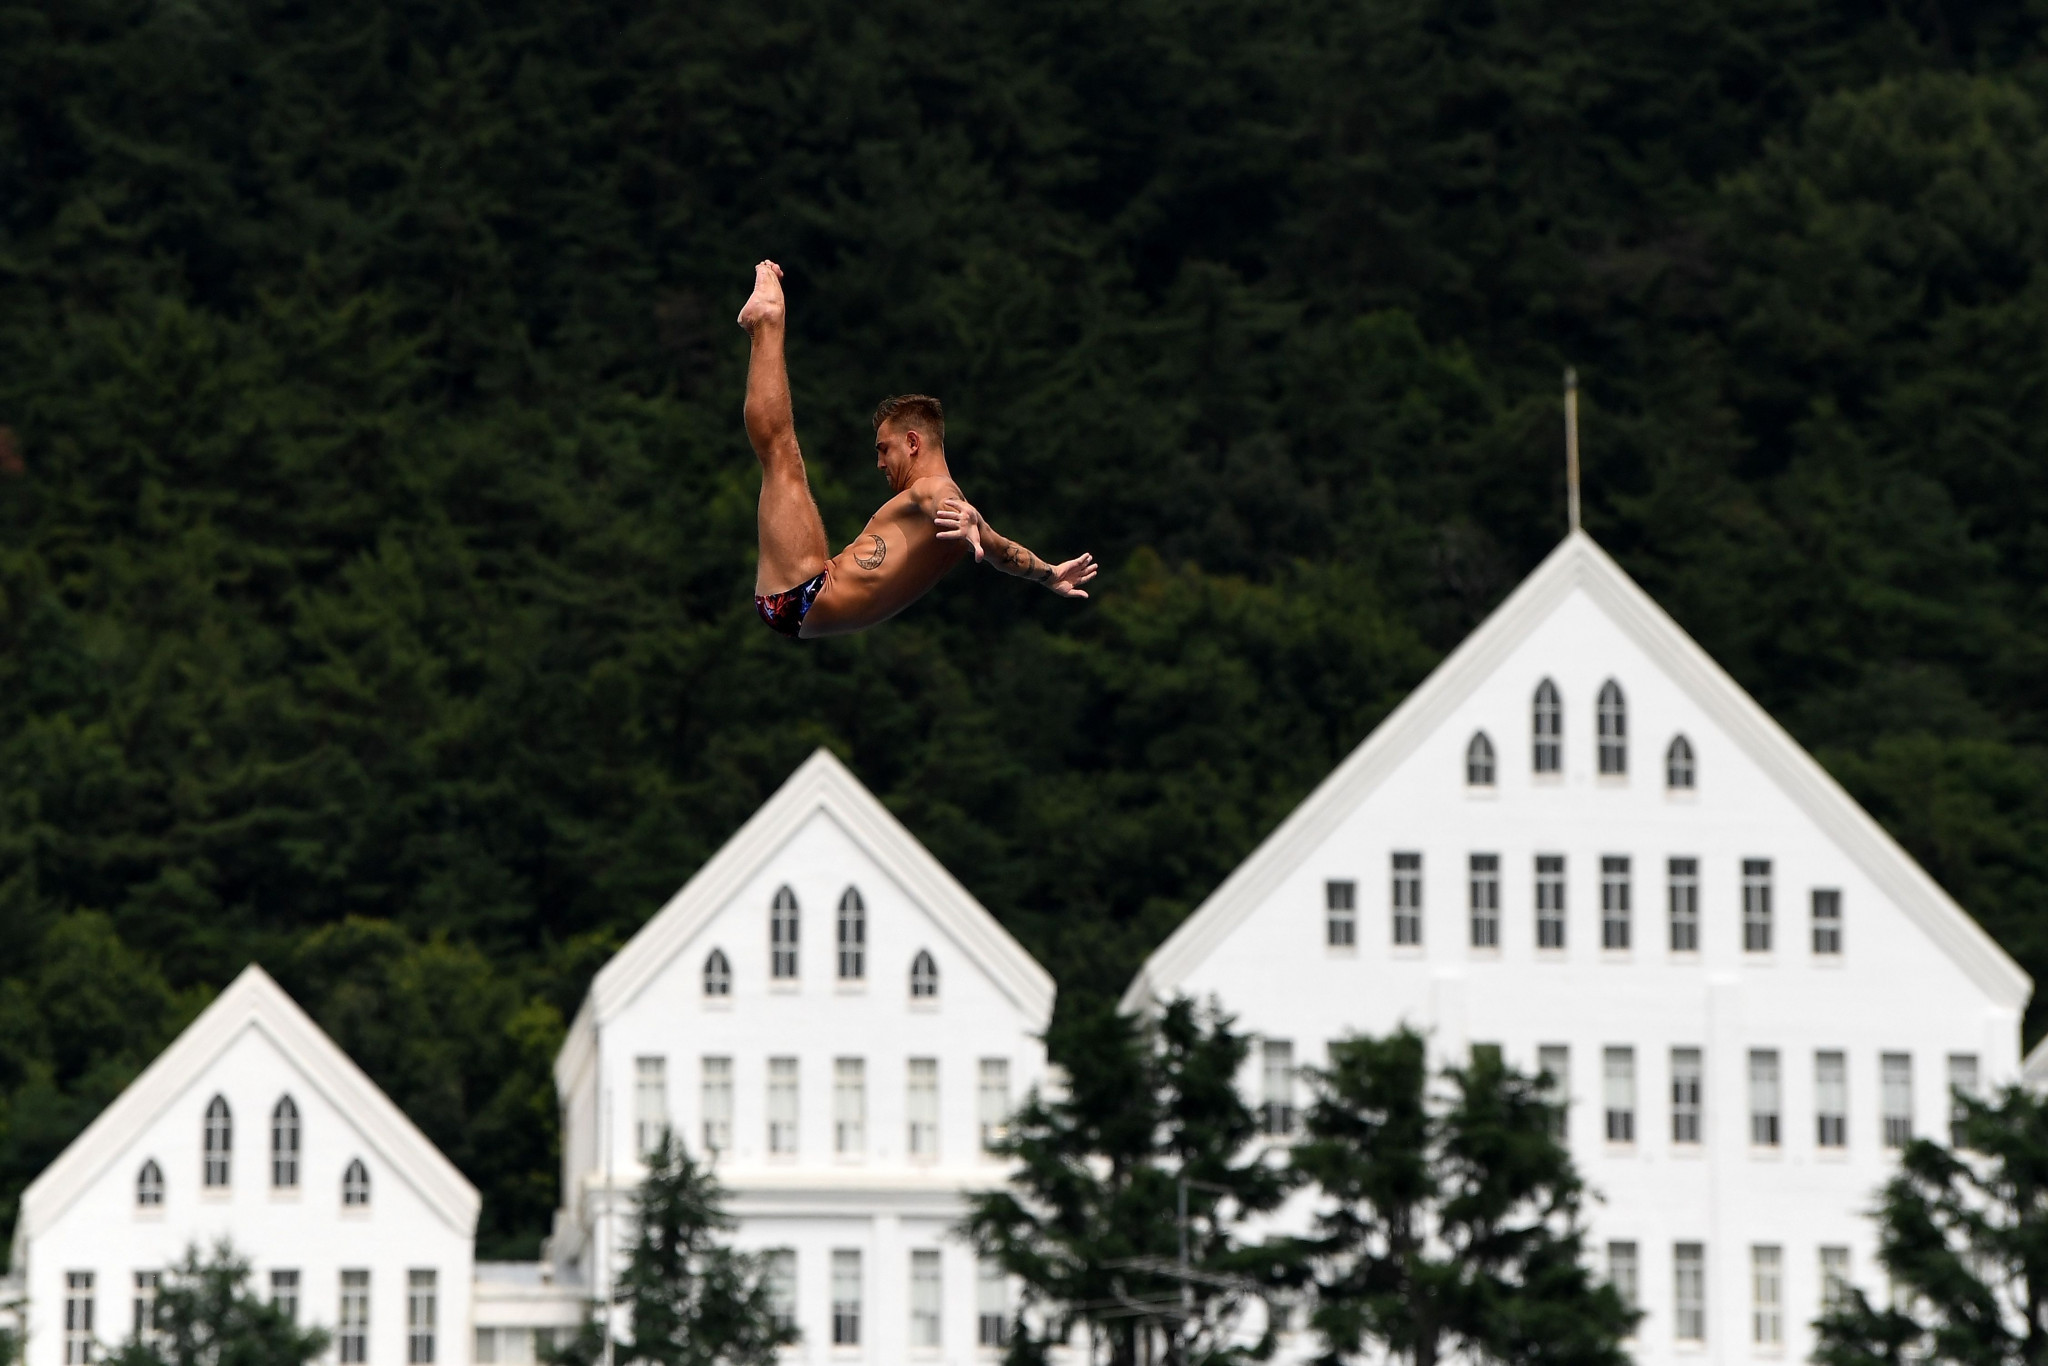 Russia's Nikita Fedotov competes in a round of the men's high diving event at Chosun University in Gwangju ©Getty Images